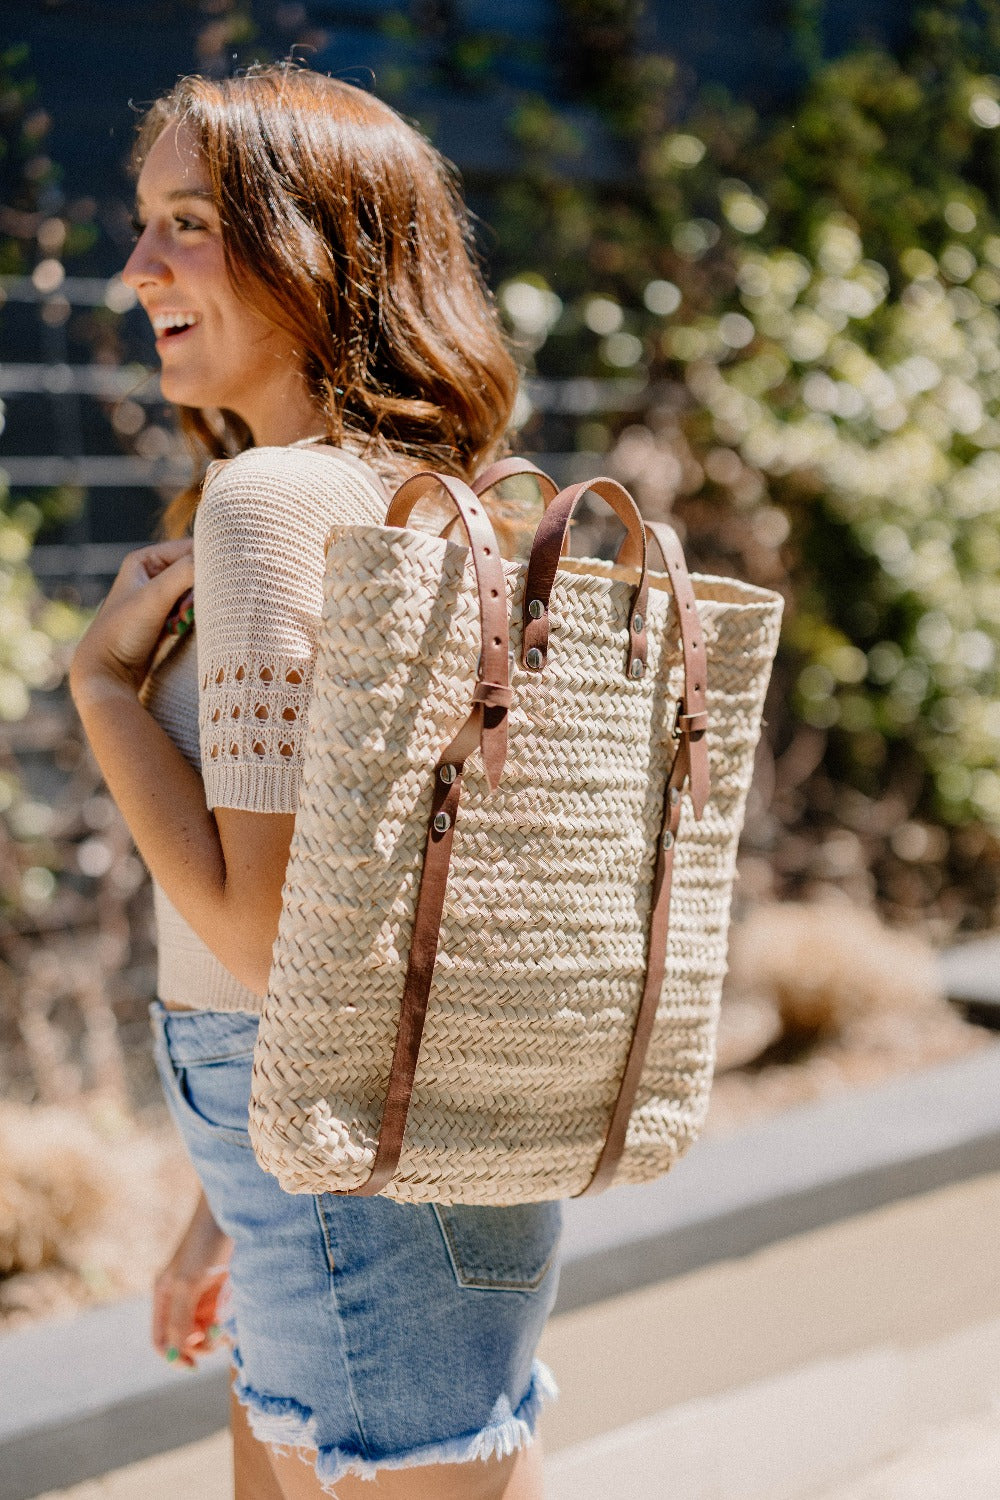 https://www.studio3-19.shop/wp-content/uploads/1686/02/only-41-98-usd-for-straw-backpack-with-long-leather-straps-in-light-brown-online-at-the-shop_0.jpg